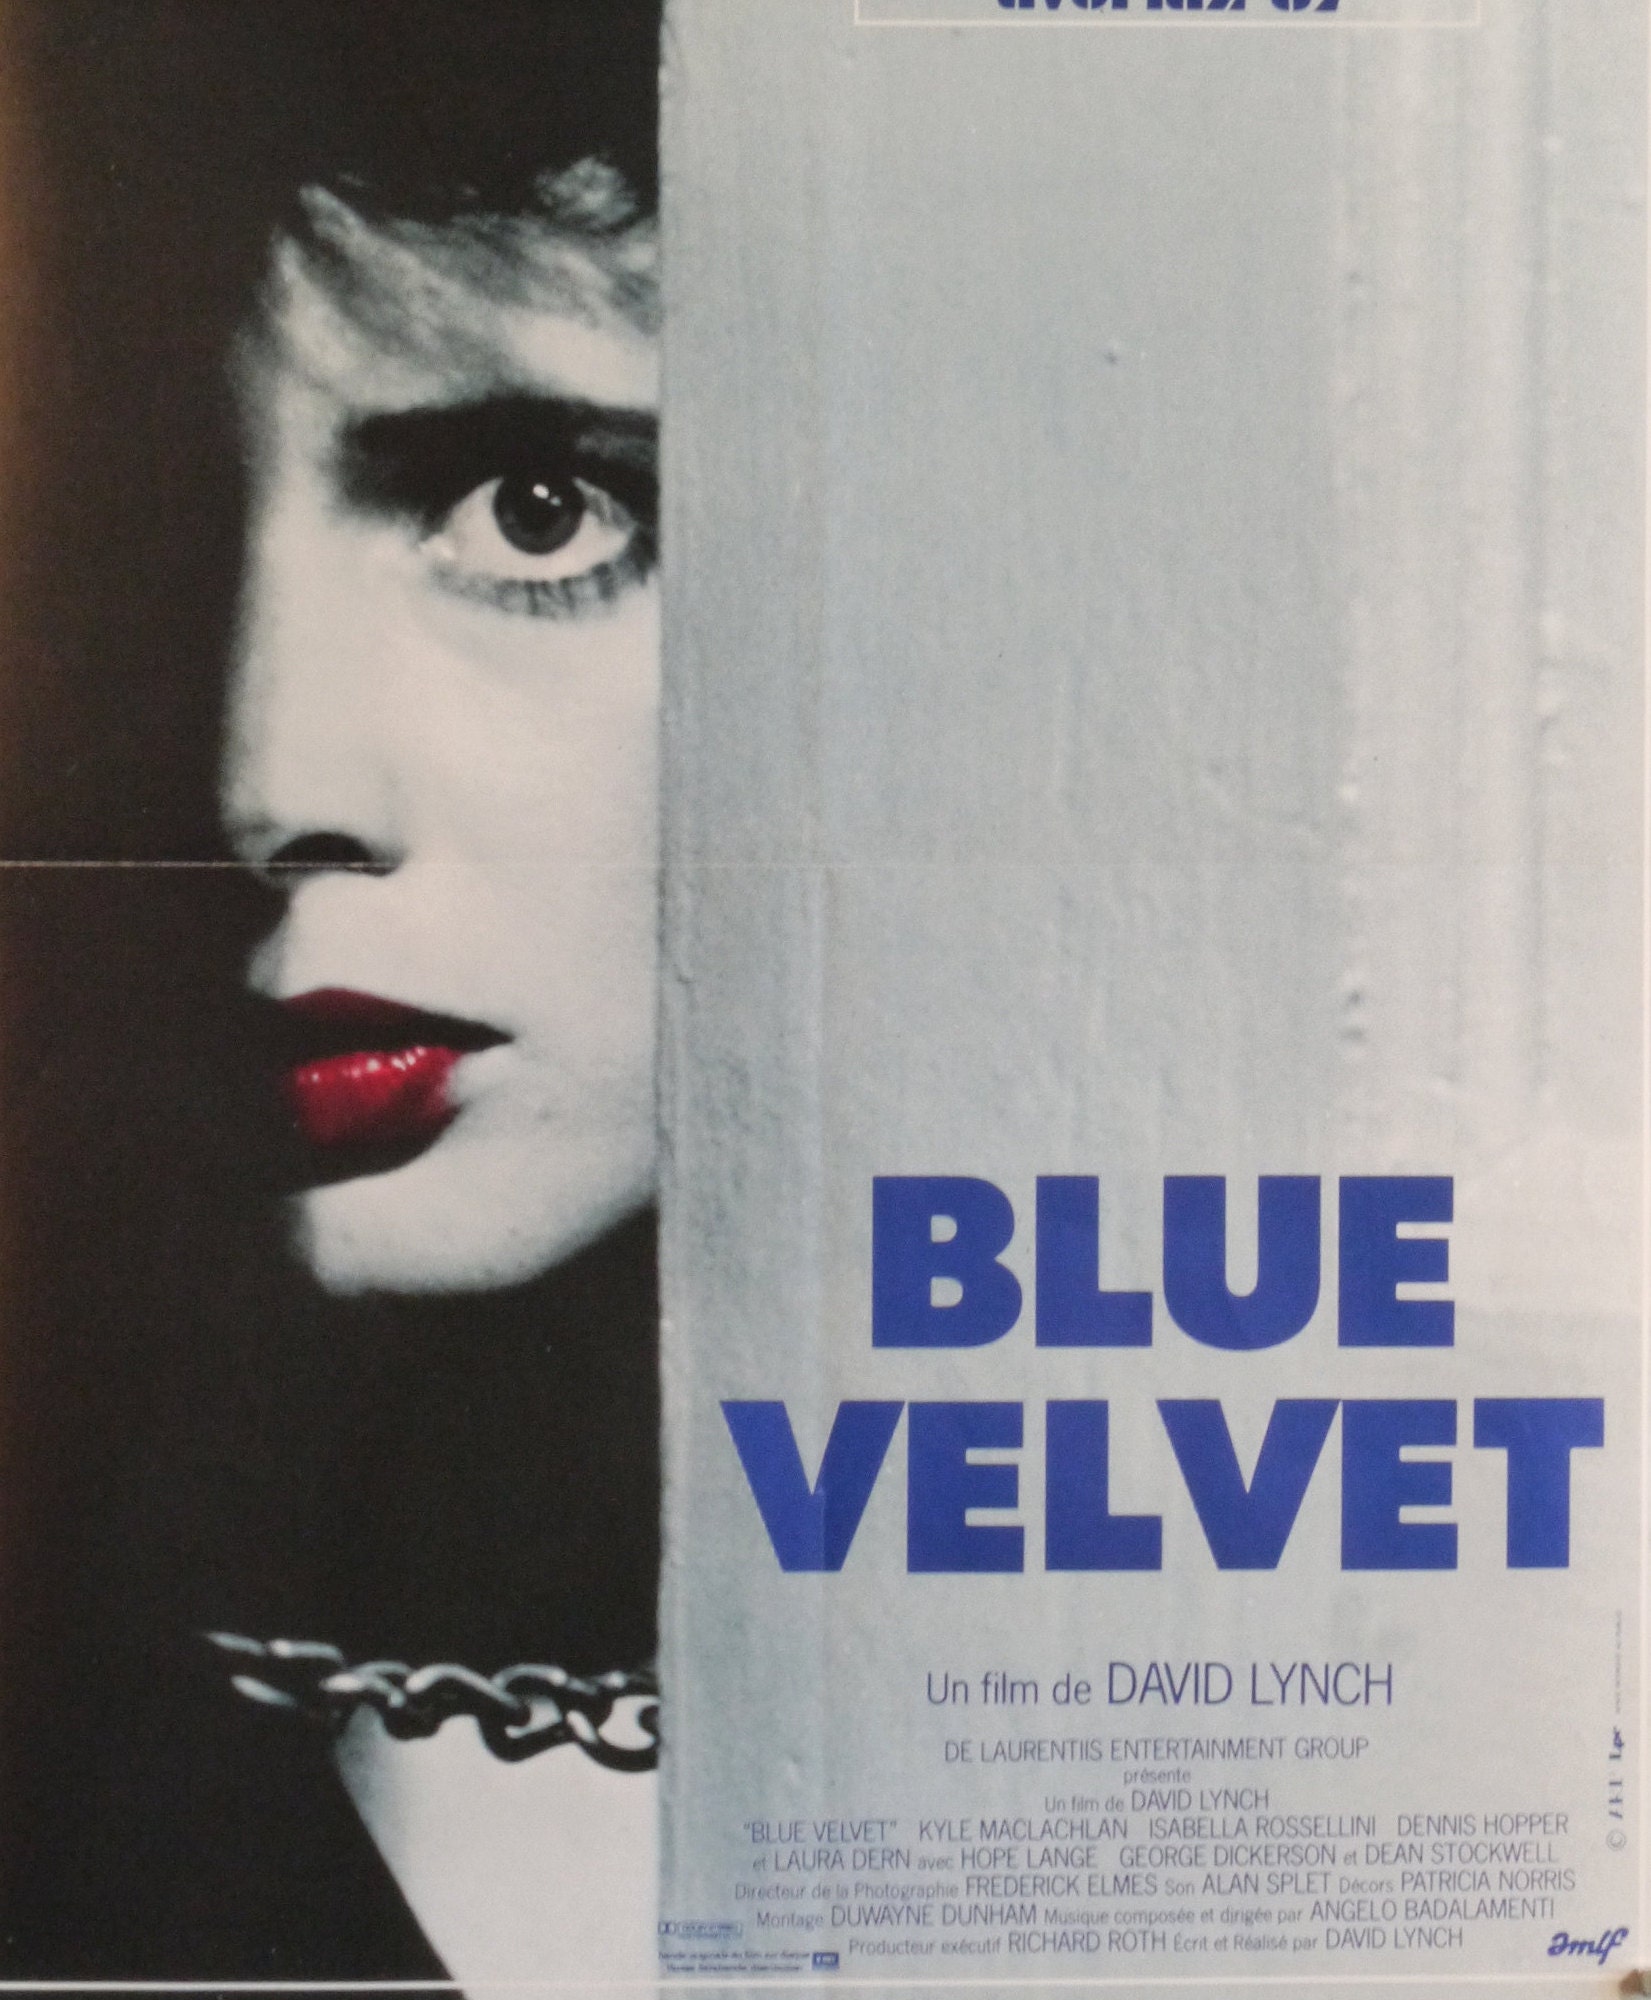 Blue Velvet-A Rare Original Vintage French Poster of David Lynchs Surreal Erotic Mystery with Isabella Rossellini and Kyle MacLachlan